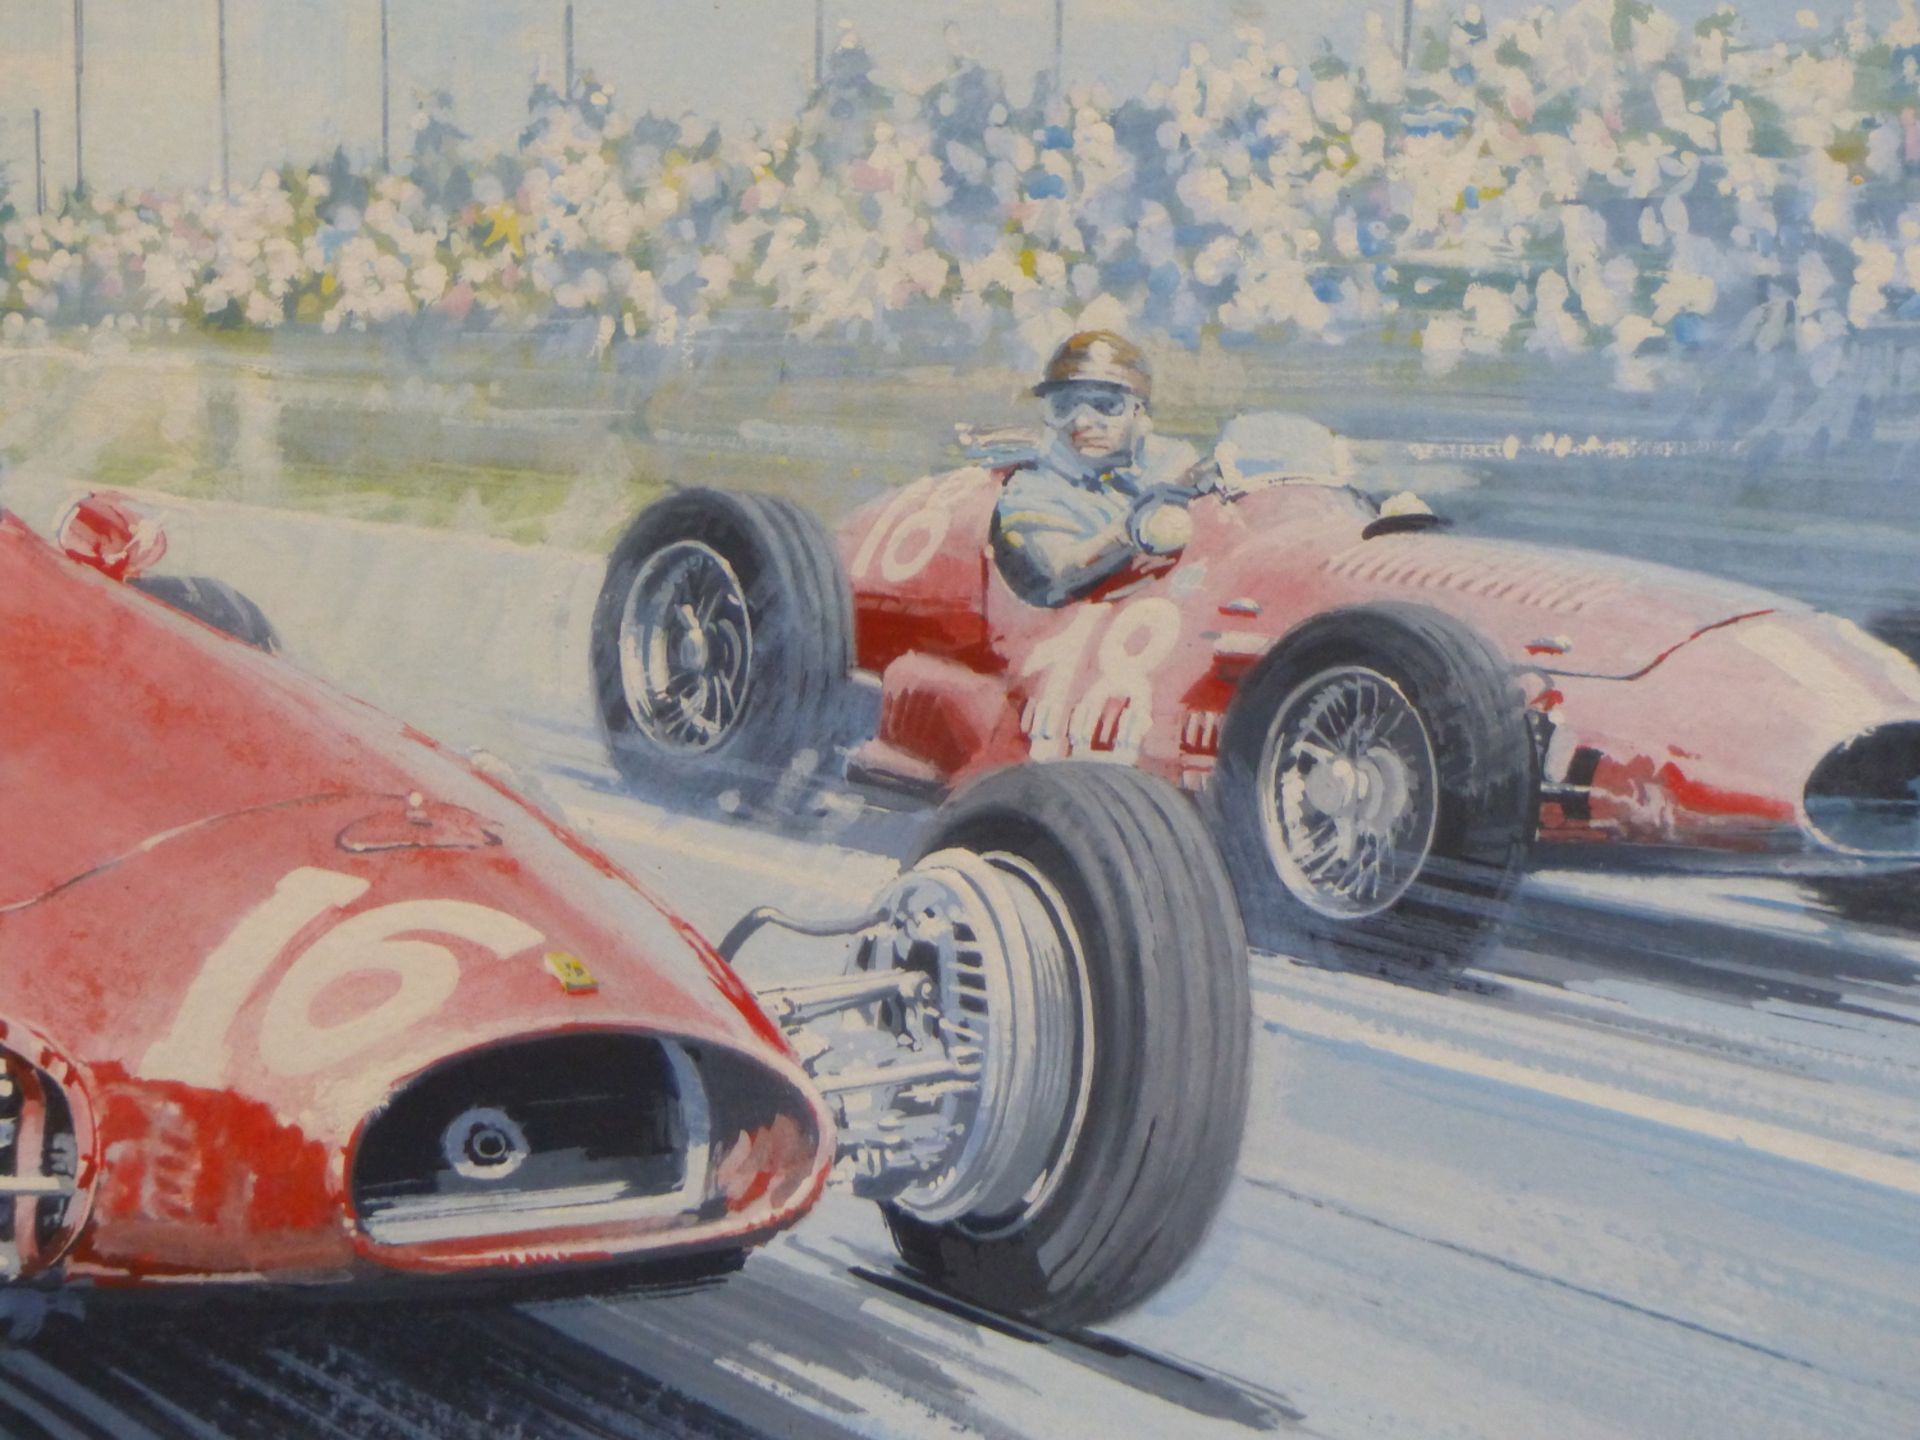 RODNEY DIGGENS (B 1937), ARR. THE 1953 FRENCH GRAND PRIX MIKE HAWTHORN IN A FERRARI LEADING FANGIO - Image 4 of 10